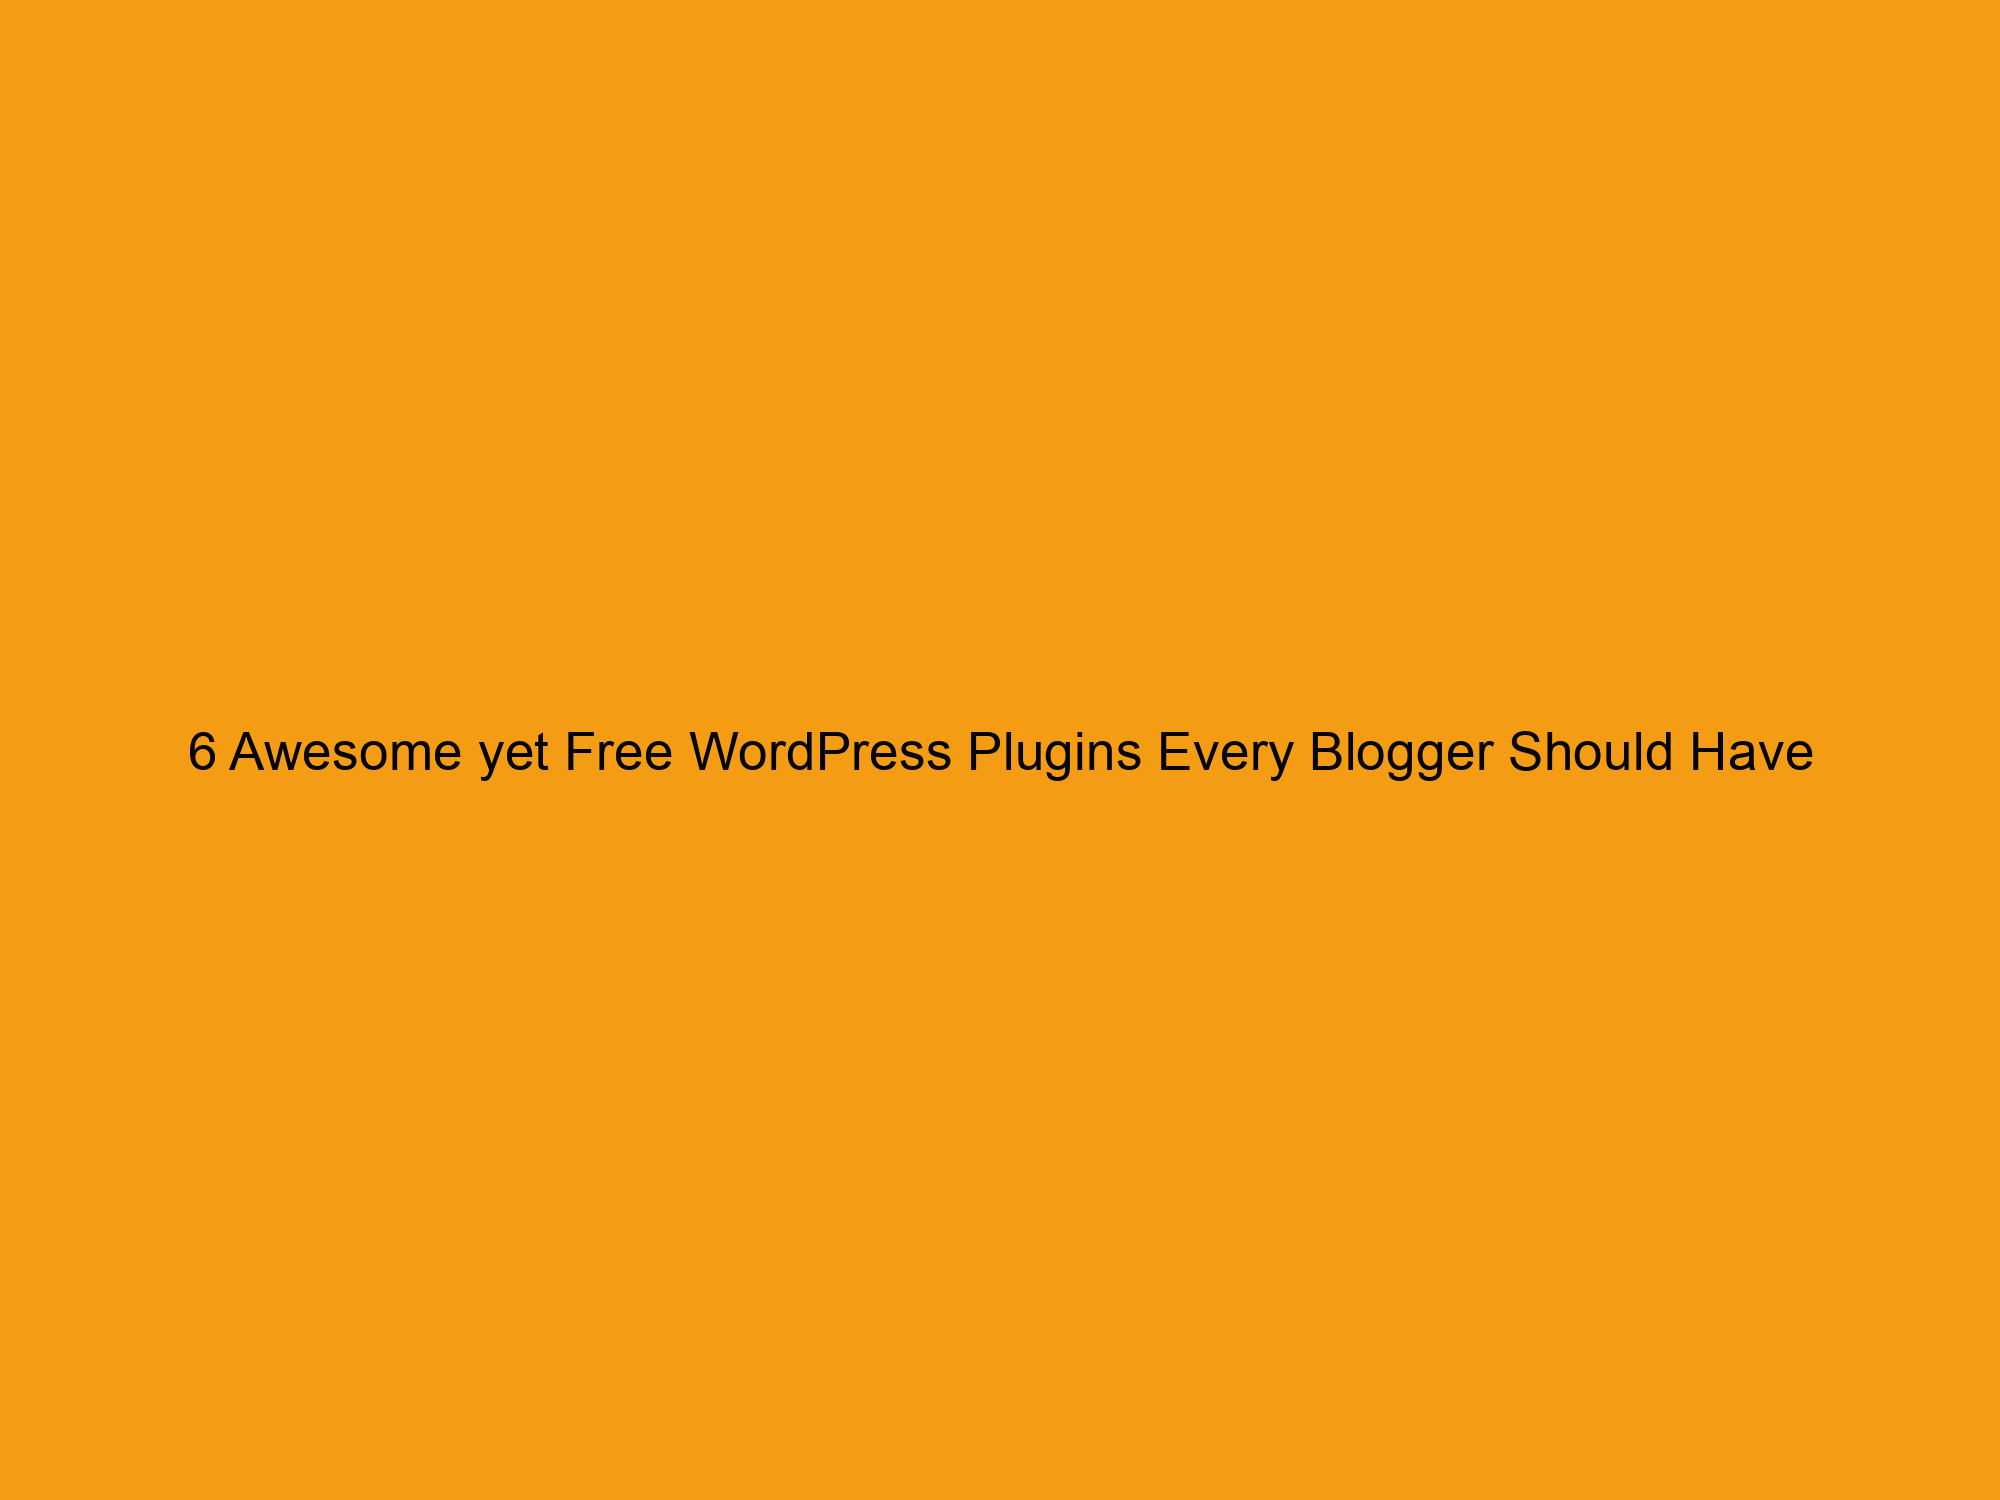 6 Awesome yet Free WordPress Plugins Every Blogger Should Have